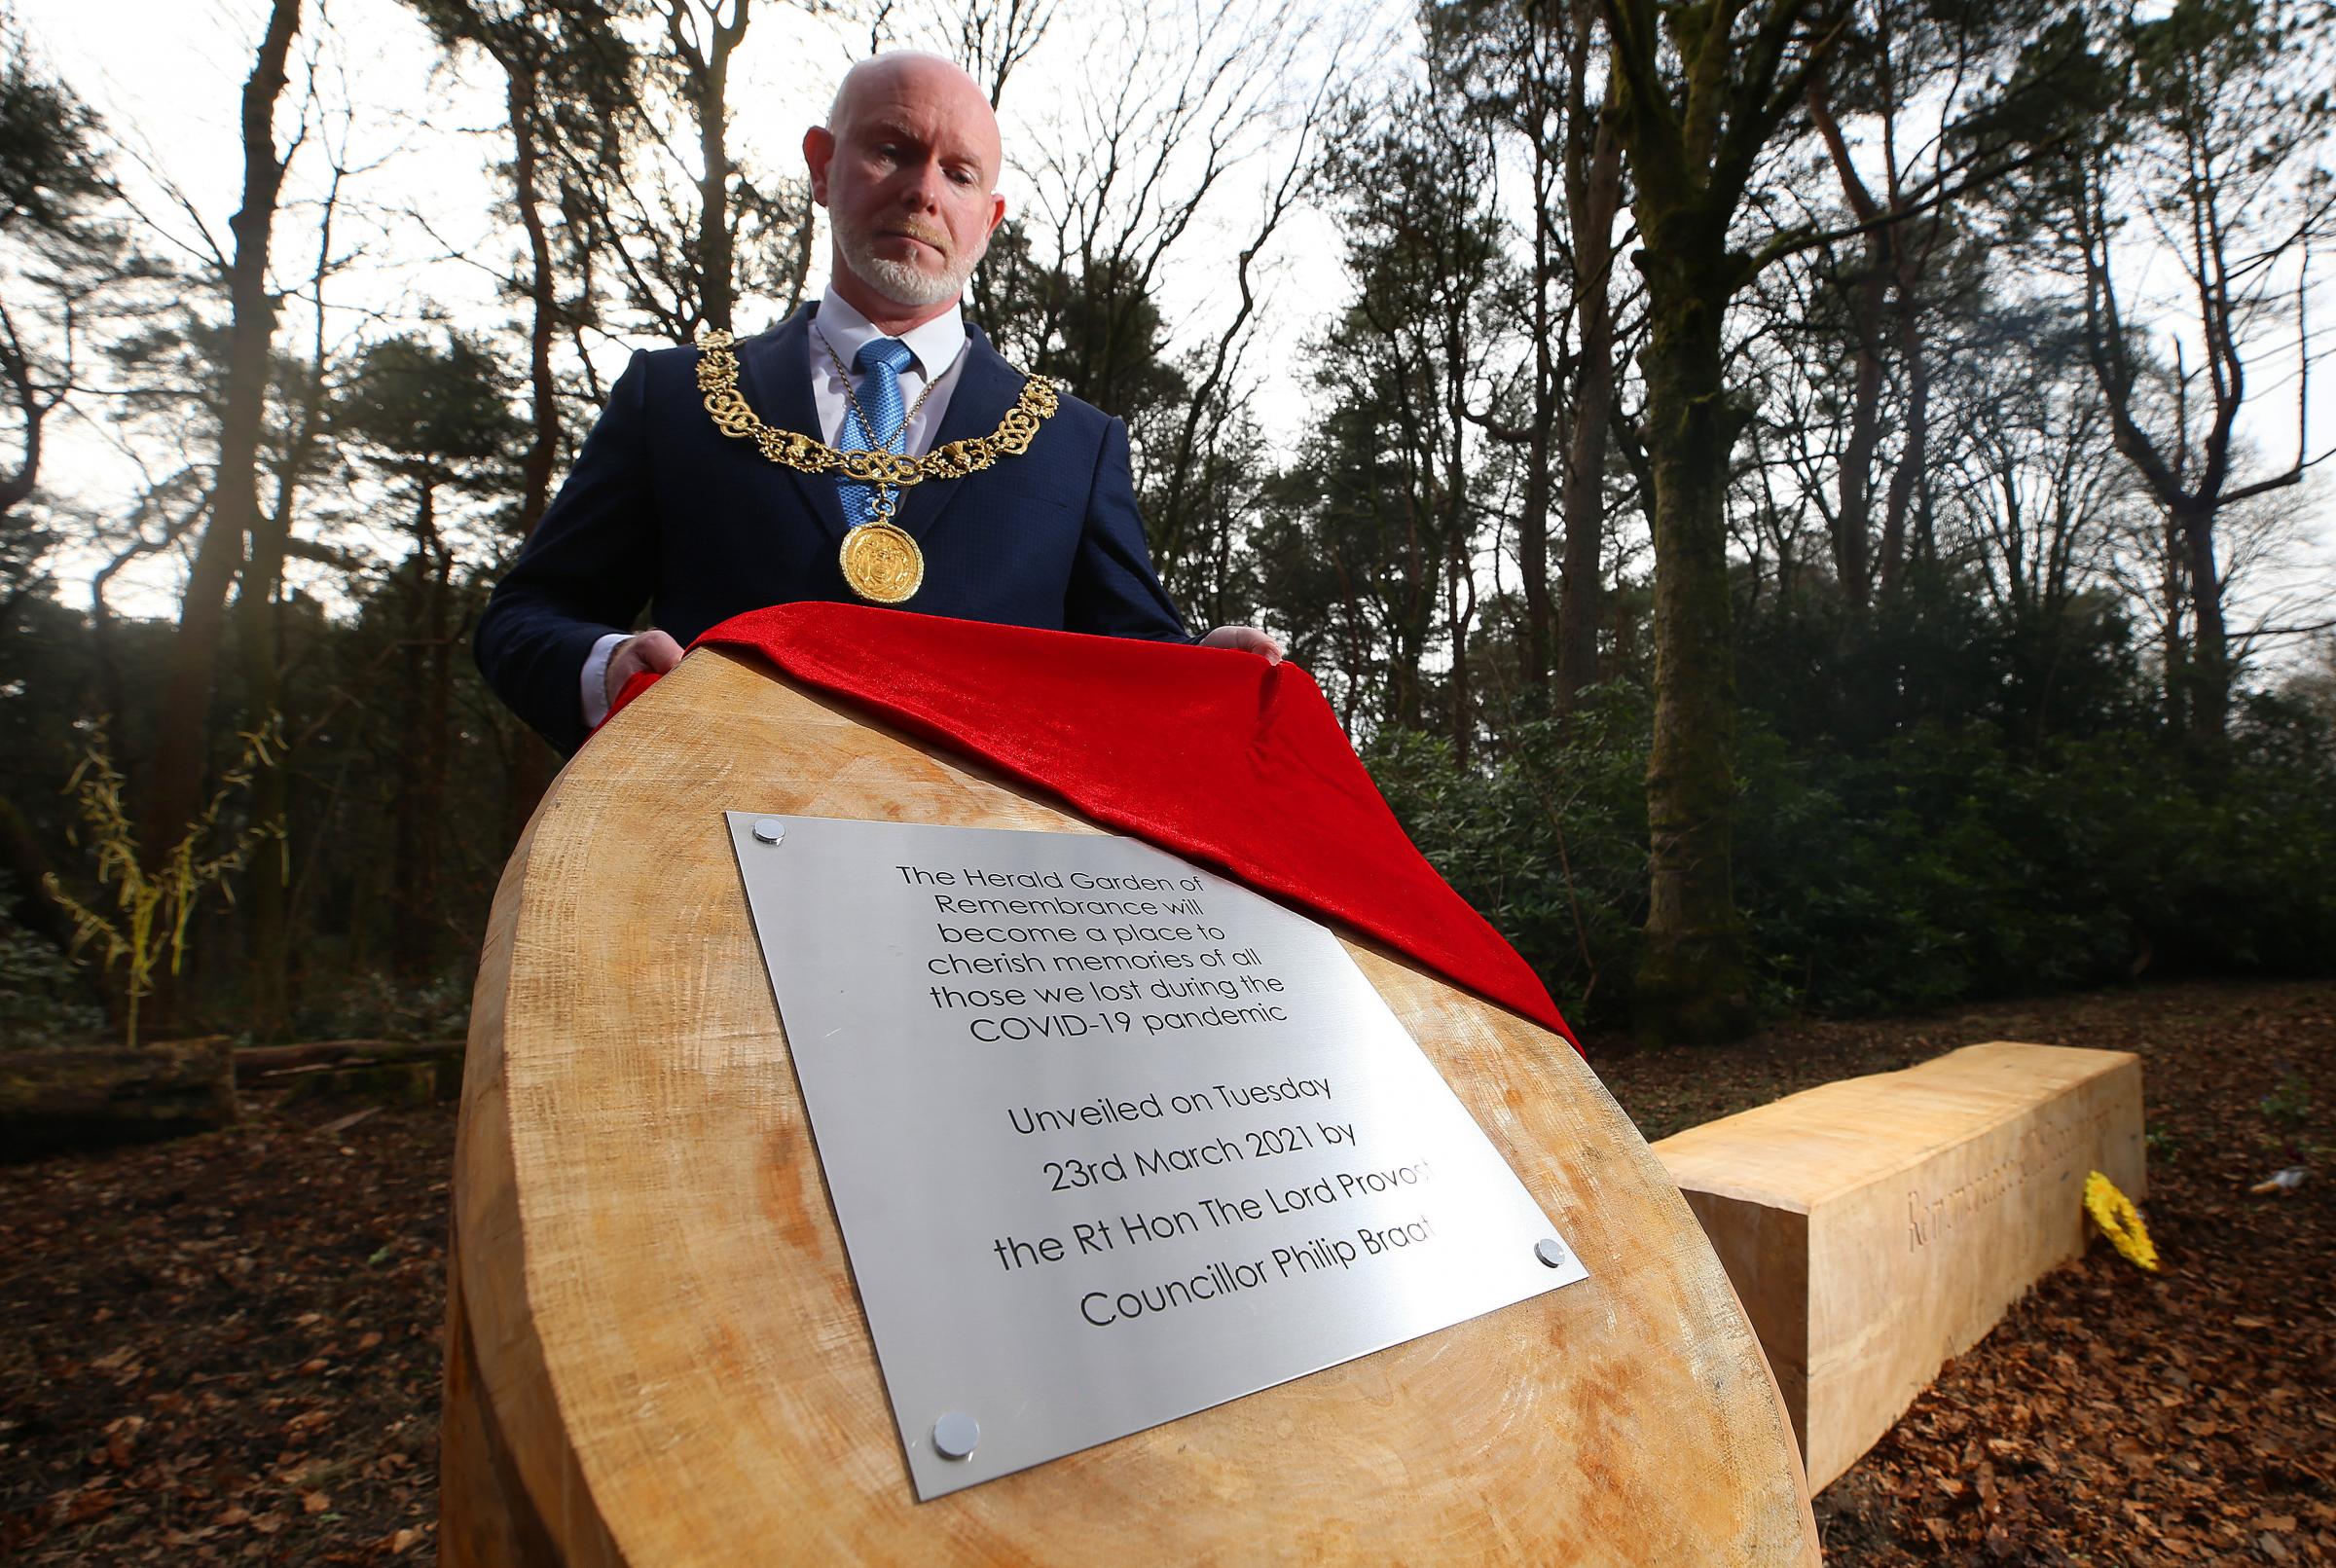 The plaque is unveiled by Lord Provost of Glasgow Philip Braat in Pollok Park to mark the site reveal of the Garden of Remembrance. Photo by Gordon Terris.